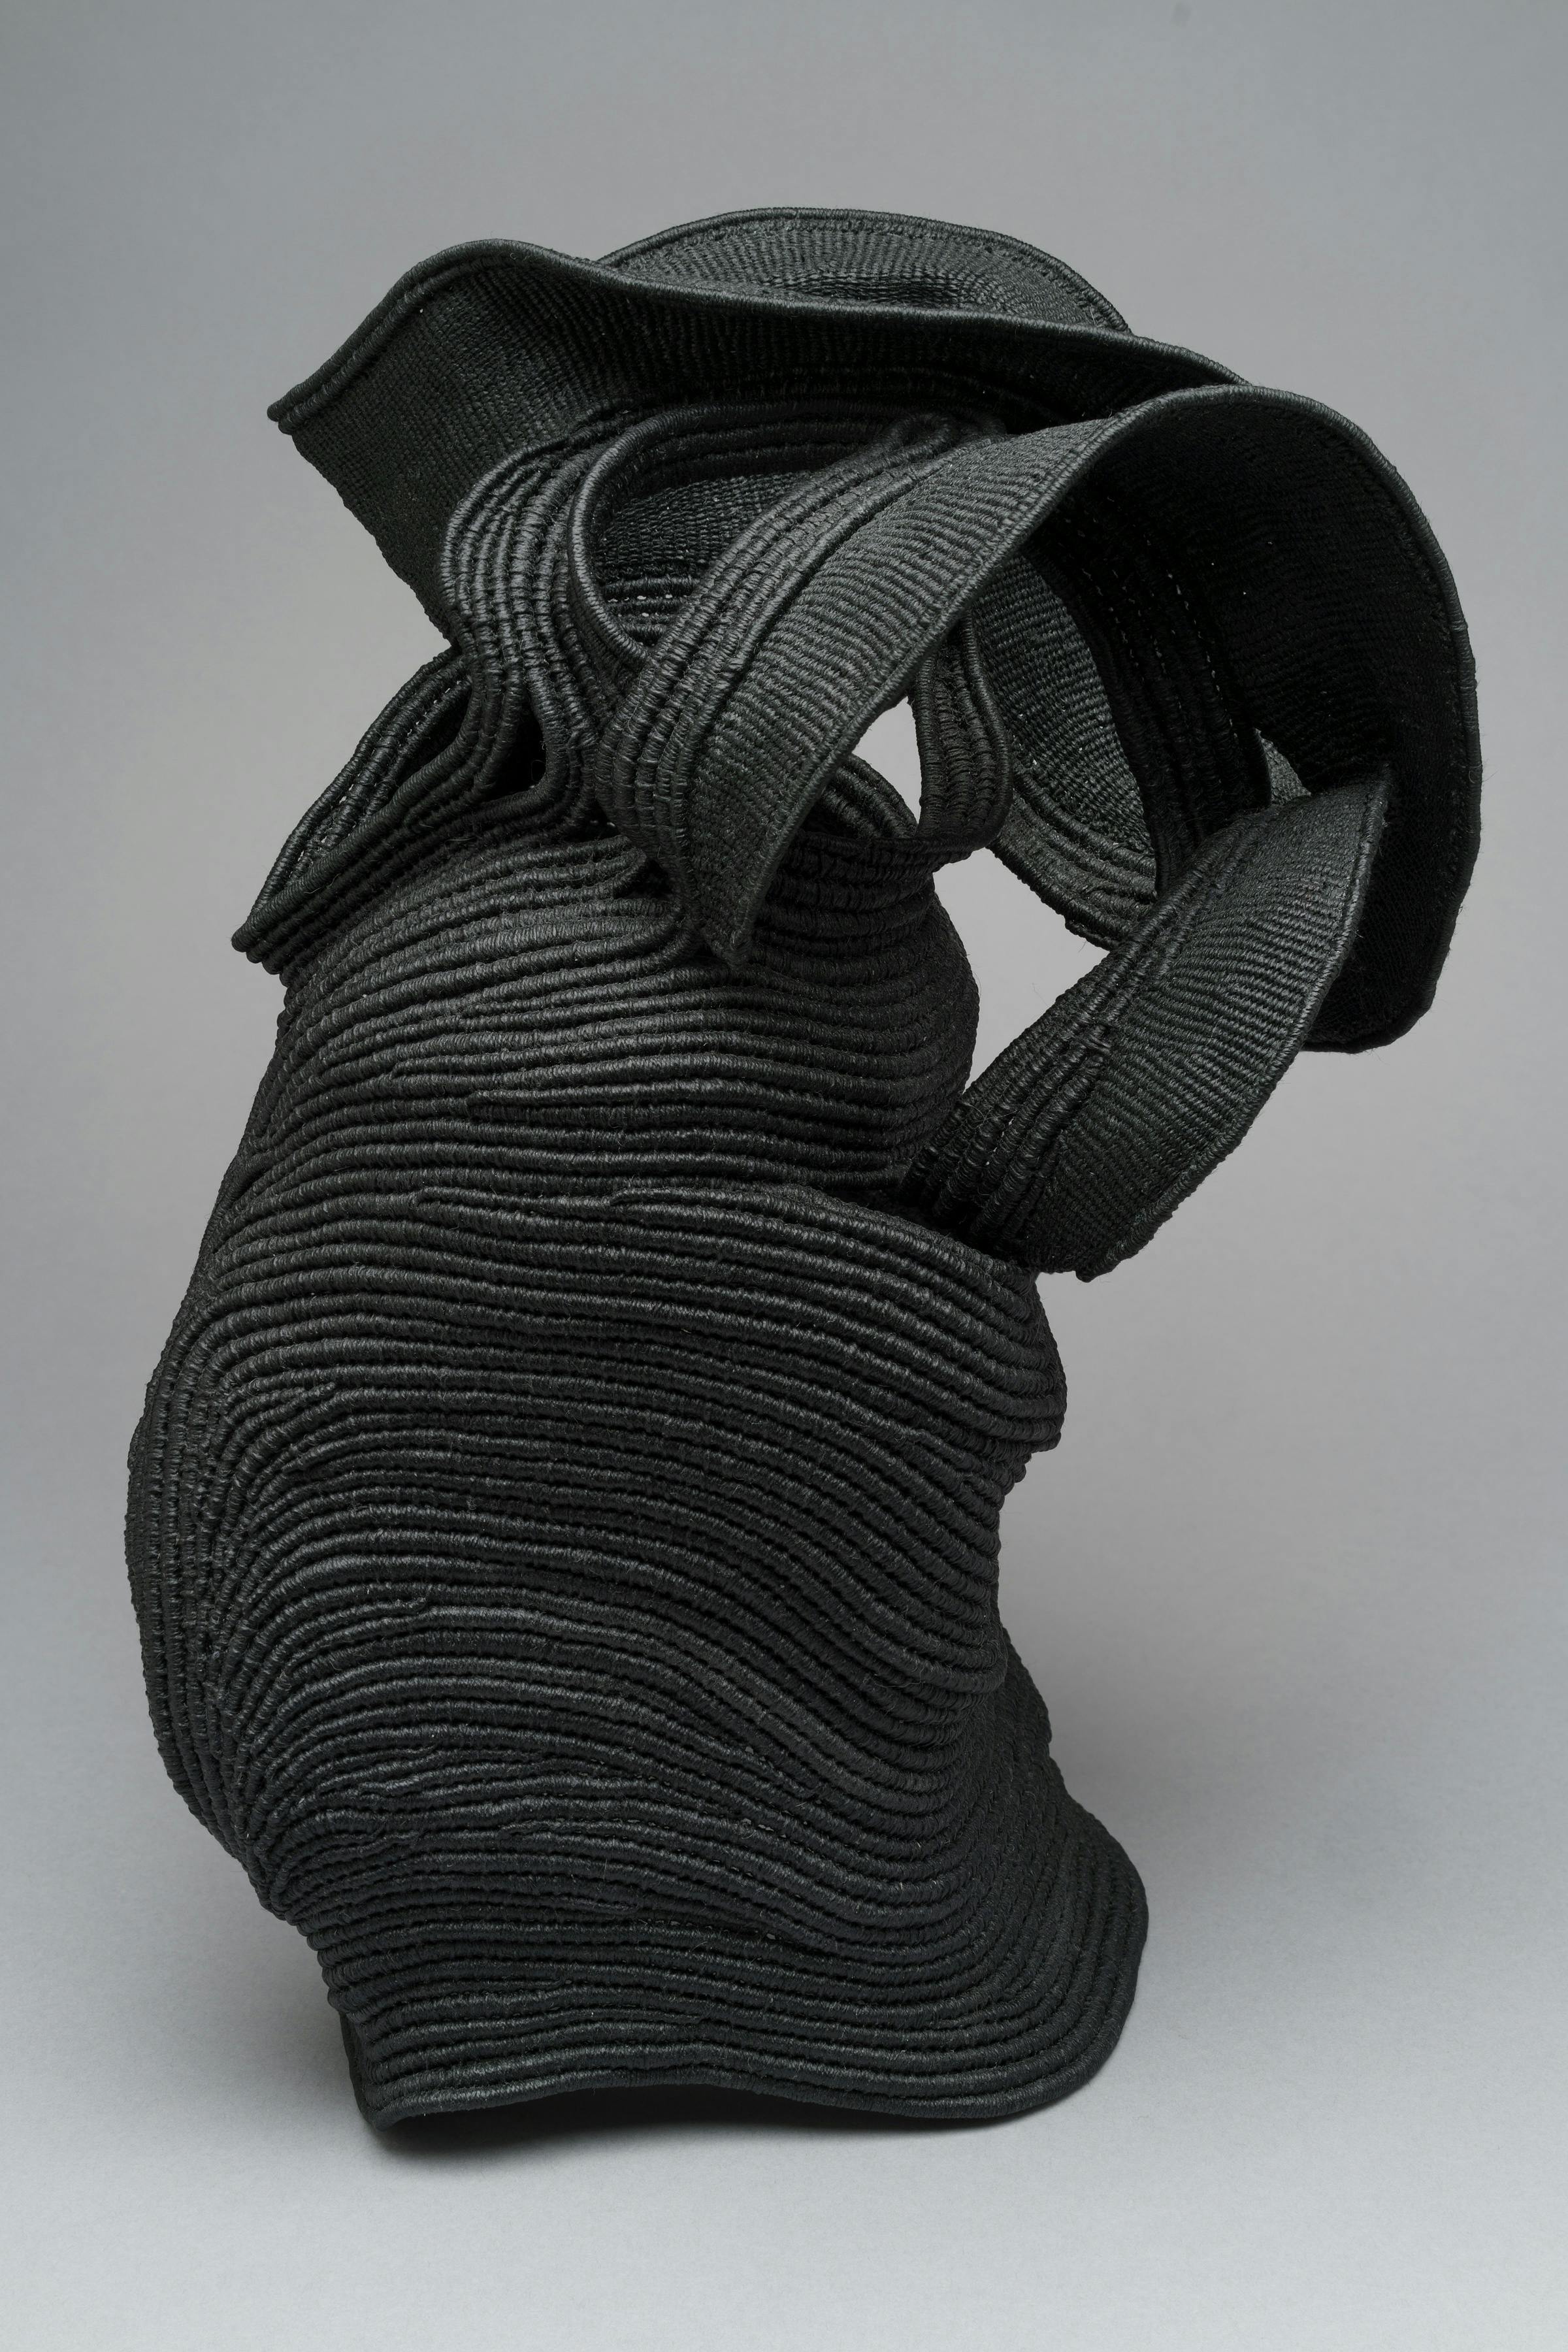 vessel-like sculpture made from coiled black rope